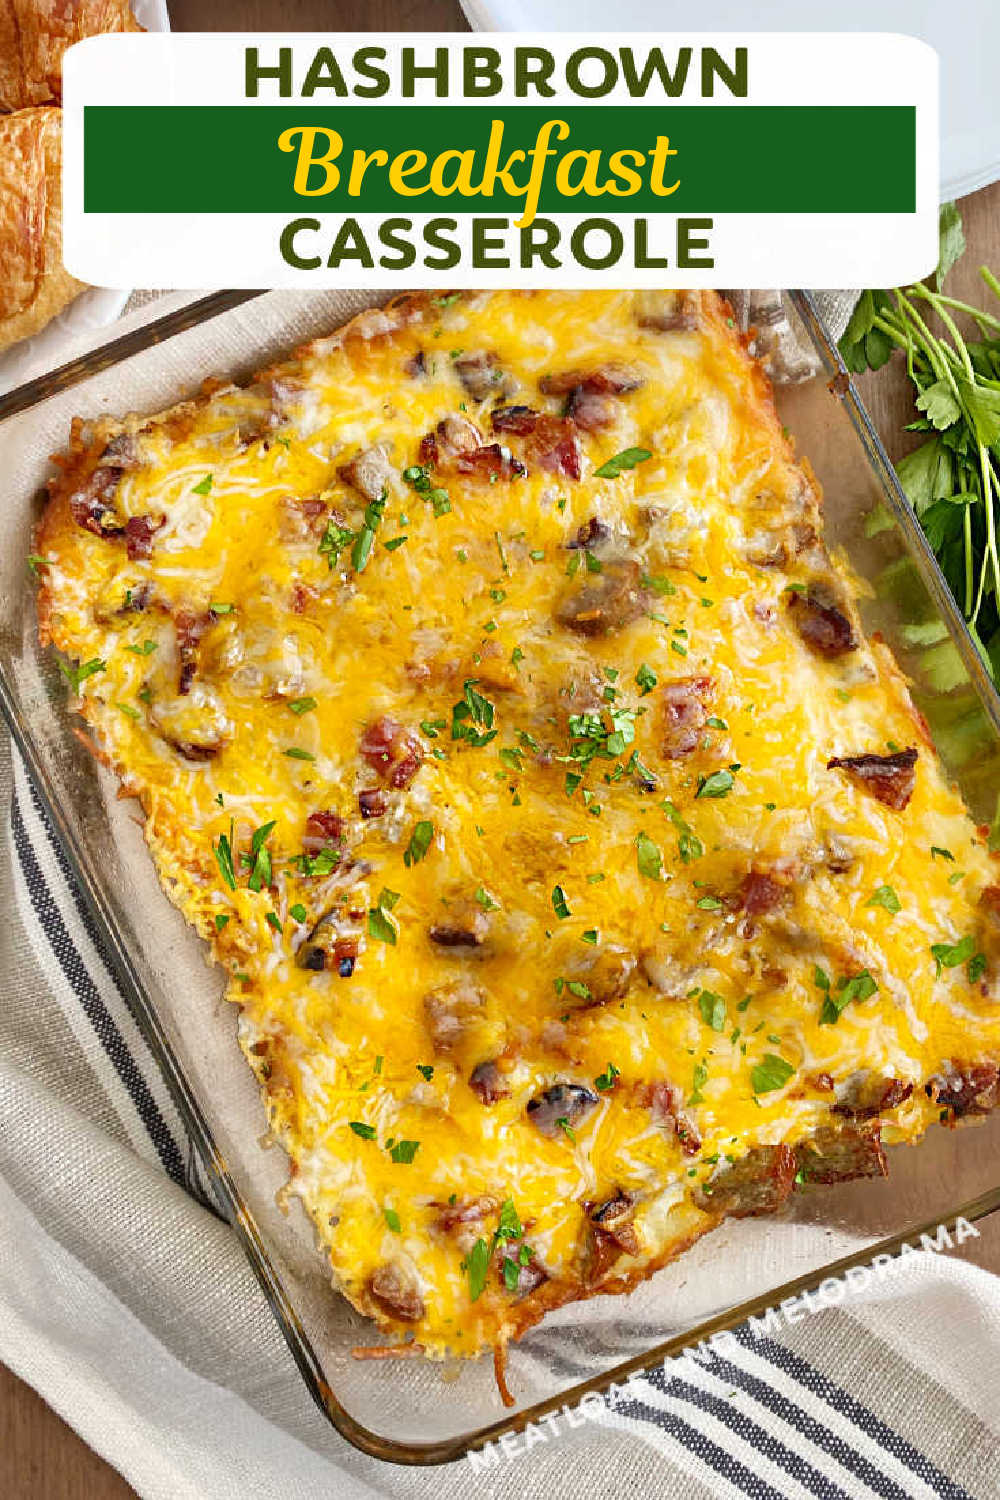 Hashbrown Breakfast Casserole is an overnight breakfast casserole made with hash brown potatoes, eggs, shredded cheese and breakfast sausage. Perfect for Sunday brunch or any holiday breakfast.   via @meamel